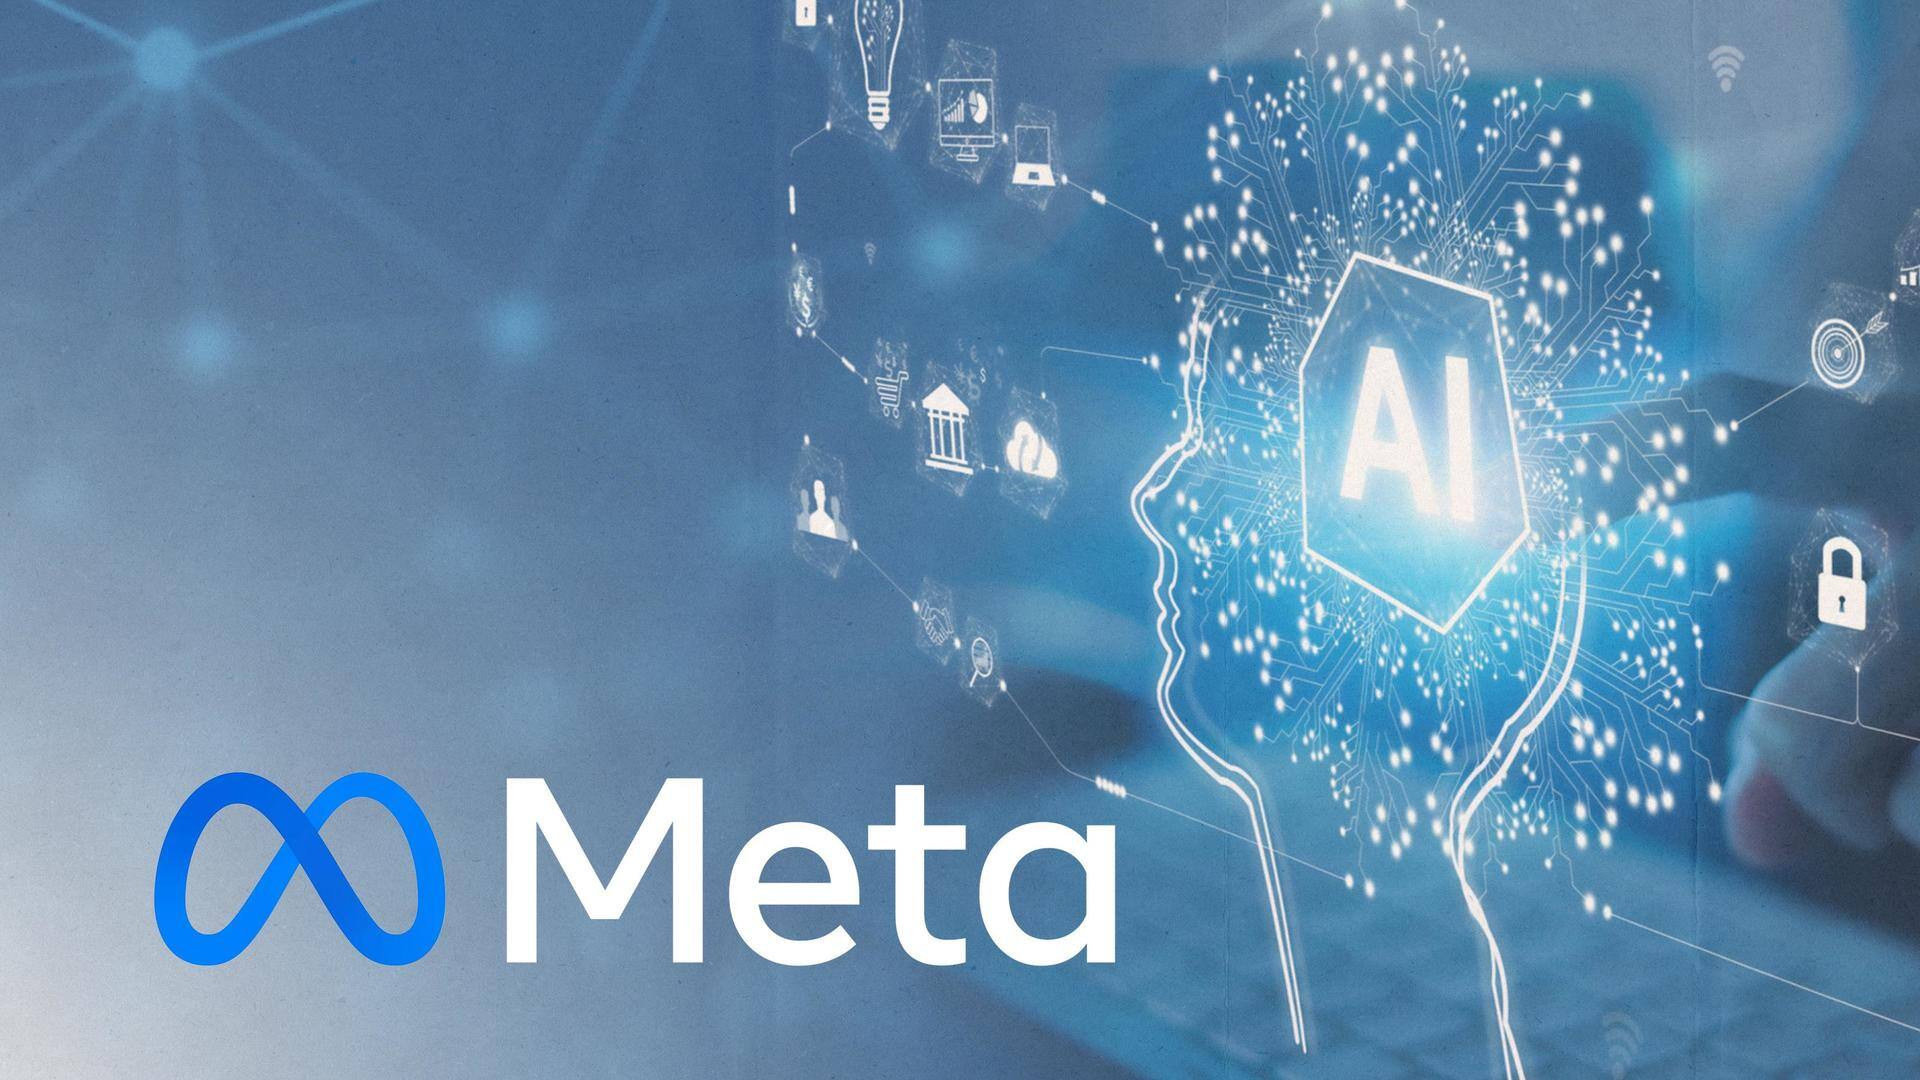 Meta introduces 'human-like' AI model for creating images